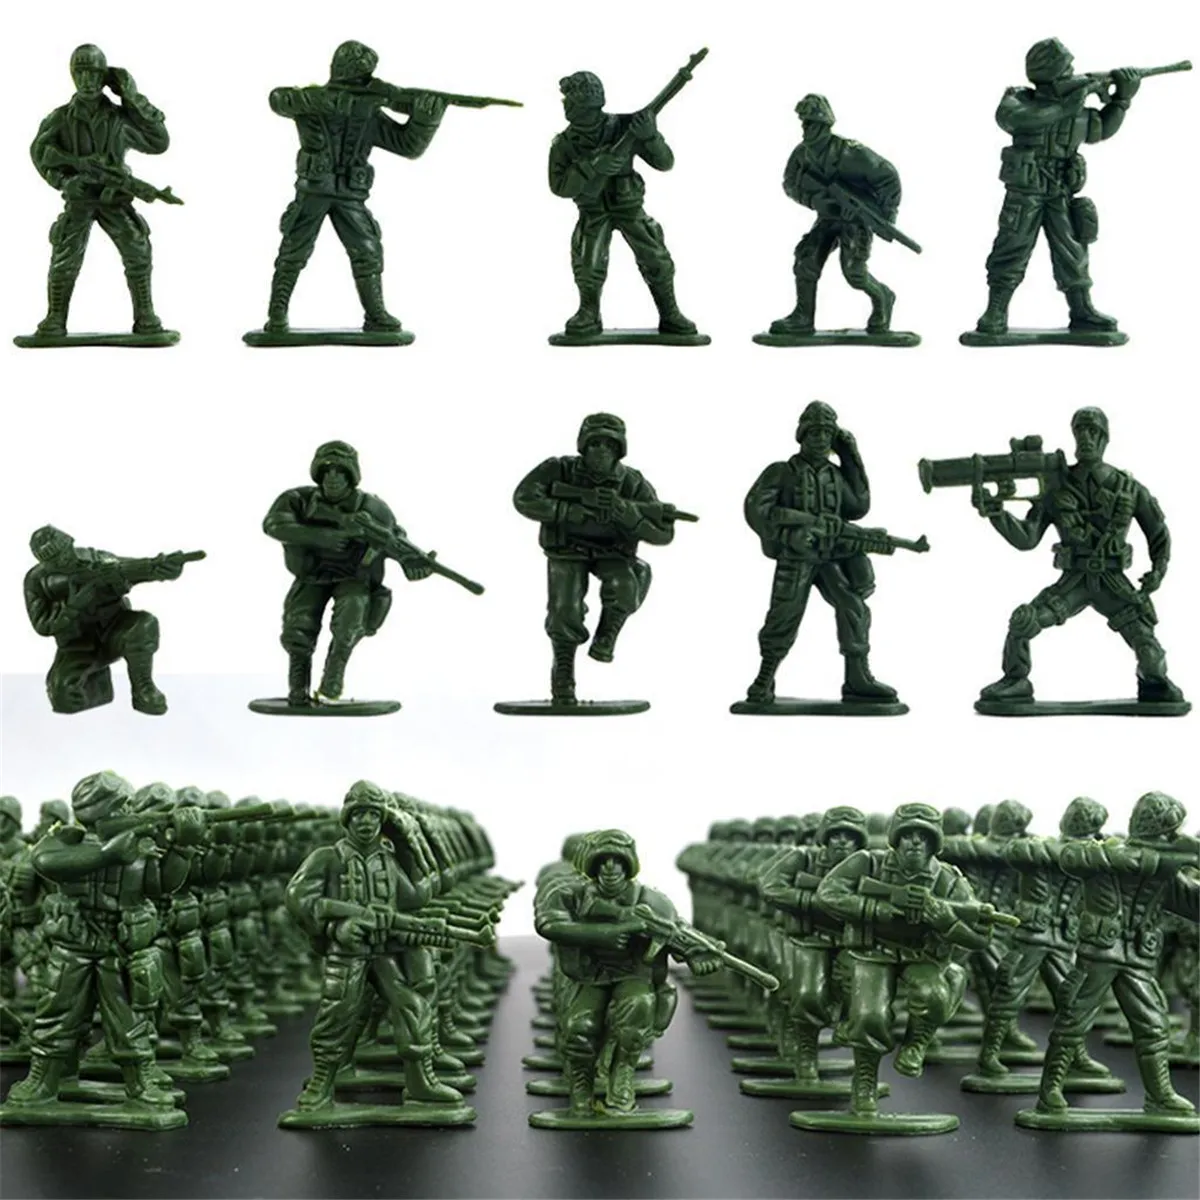 200 Pc Soldiers Posture Army Men Action Figure Kits Military Toys 2cm Gifts 